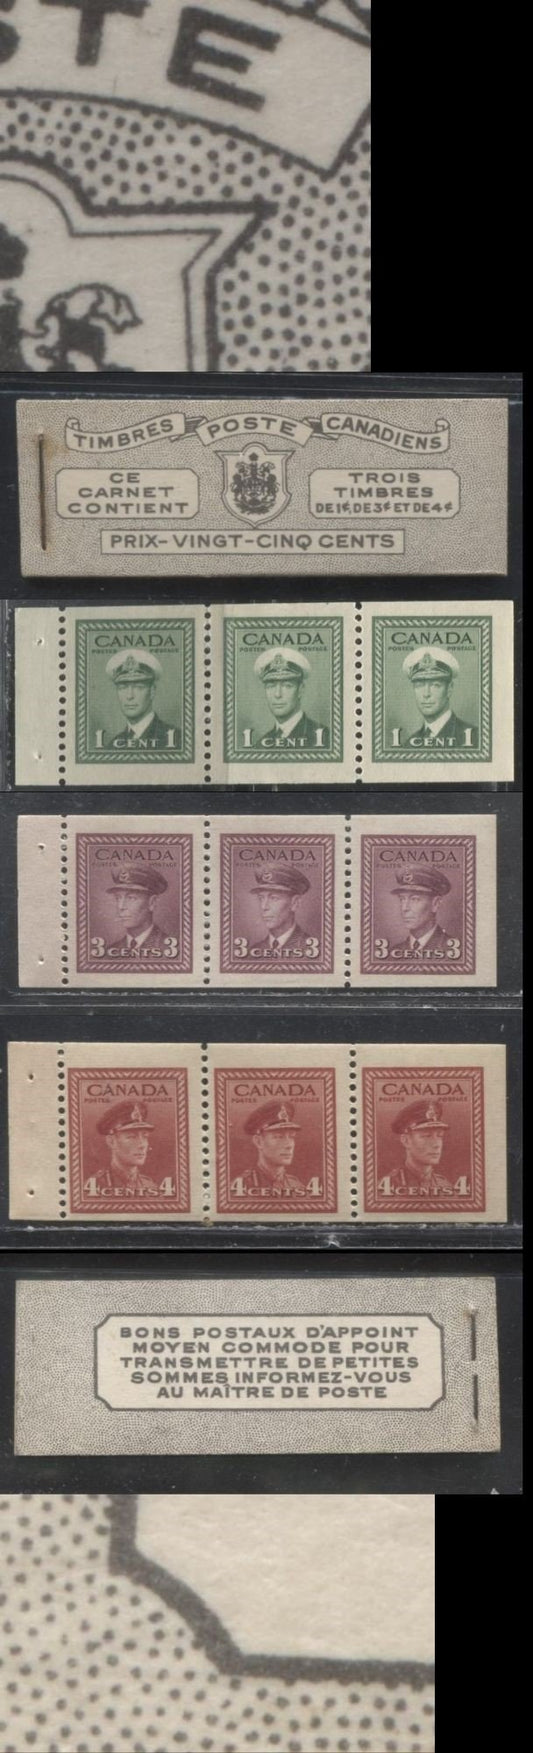 Lot 214 Canada #BK38a 1942-1949 War Issue Complete 25c, French Booklet Containing 1 Pane Each of 3 of 1c Green, 3c Rosy Plum and 4c Carmine Red, Harris Front Cover Type Vh , Back Cover Jvii, 7c & 6c Rate Page